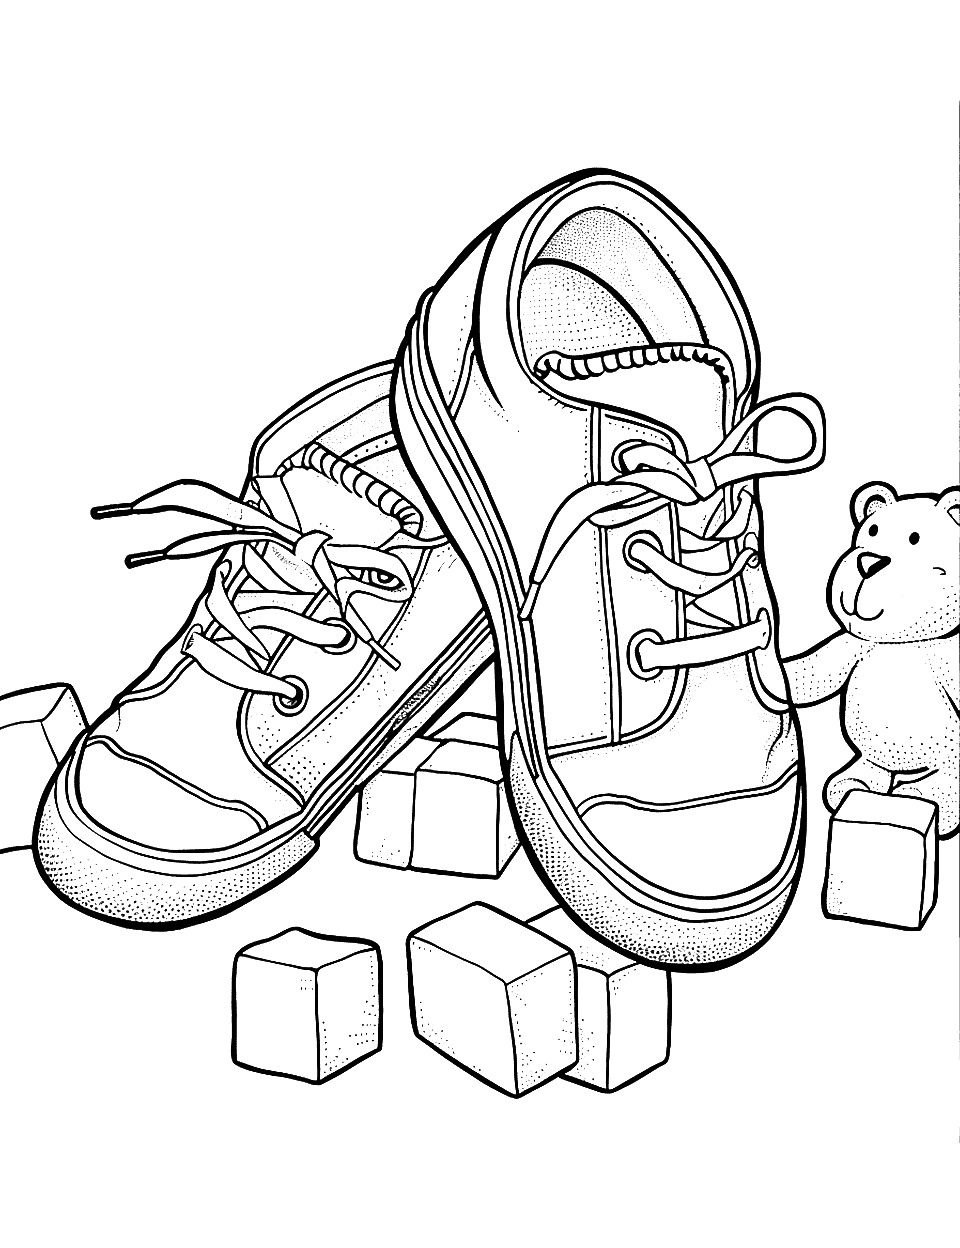 Baby Shoes at a Shower Shoe Coloring Page - Tiny baby shoes with baby blocks and a teddy bear.